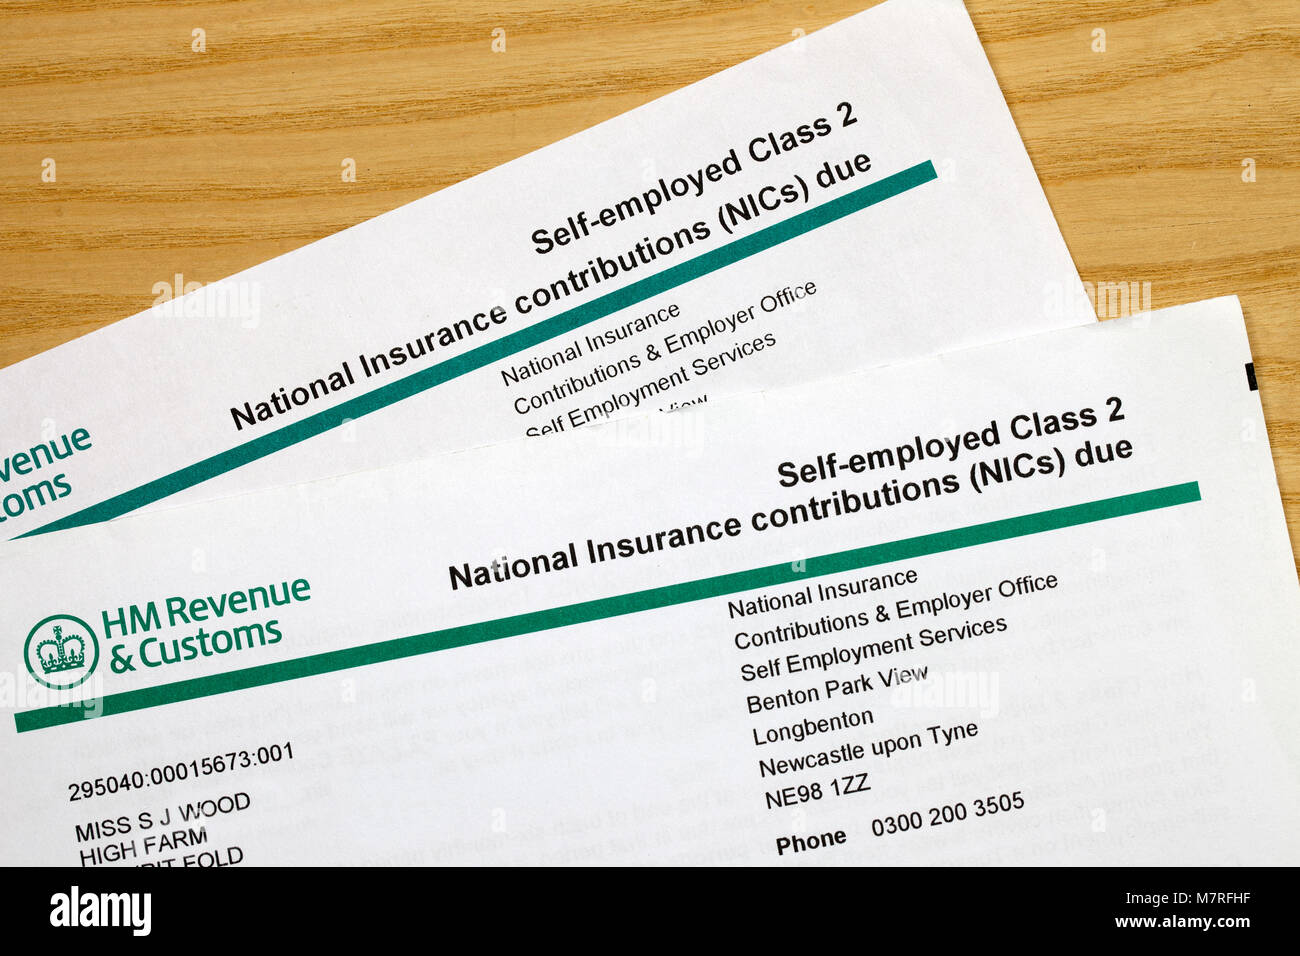 HM Revenue and Customs National Insurance Contributions due Self-employed Class 2 form Stock Photo